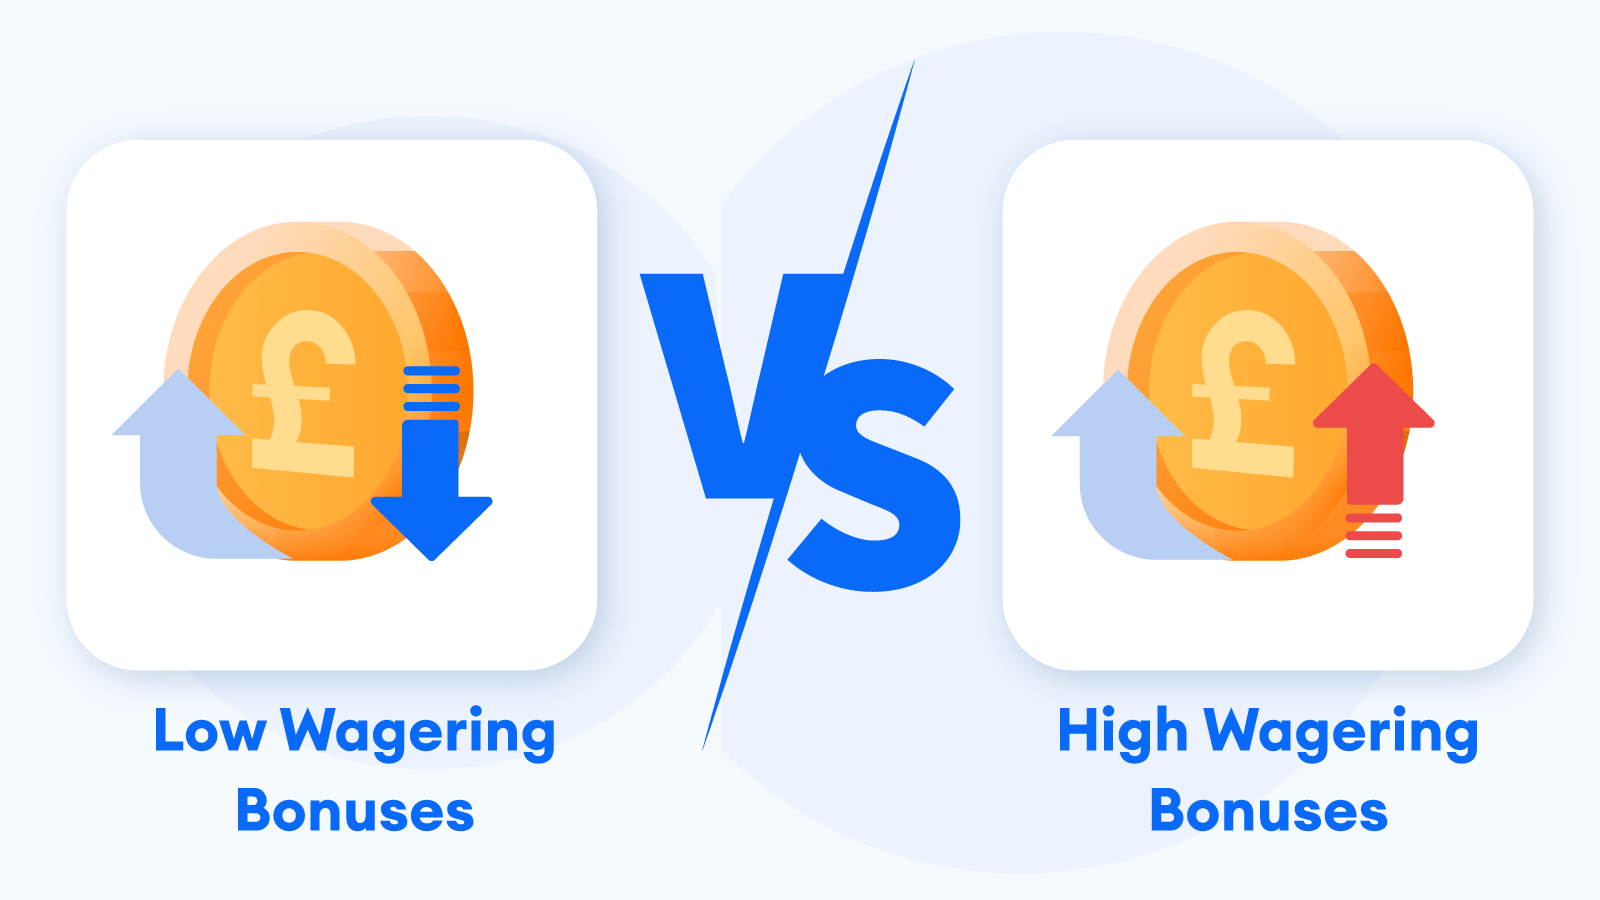 Low Wagering vs. High Wagering Bonuses